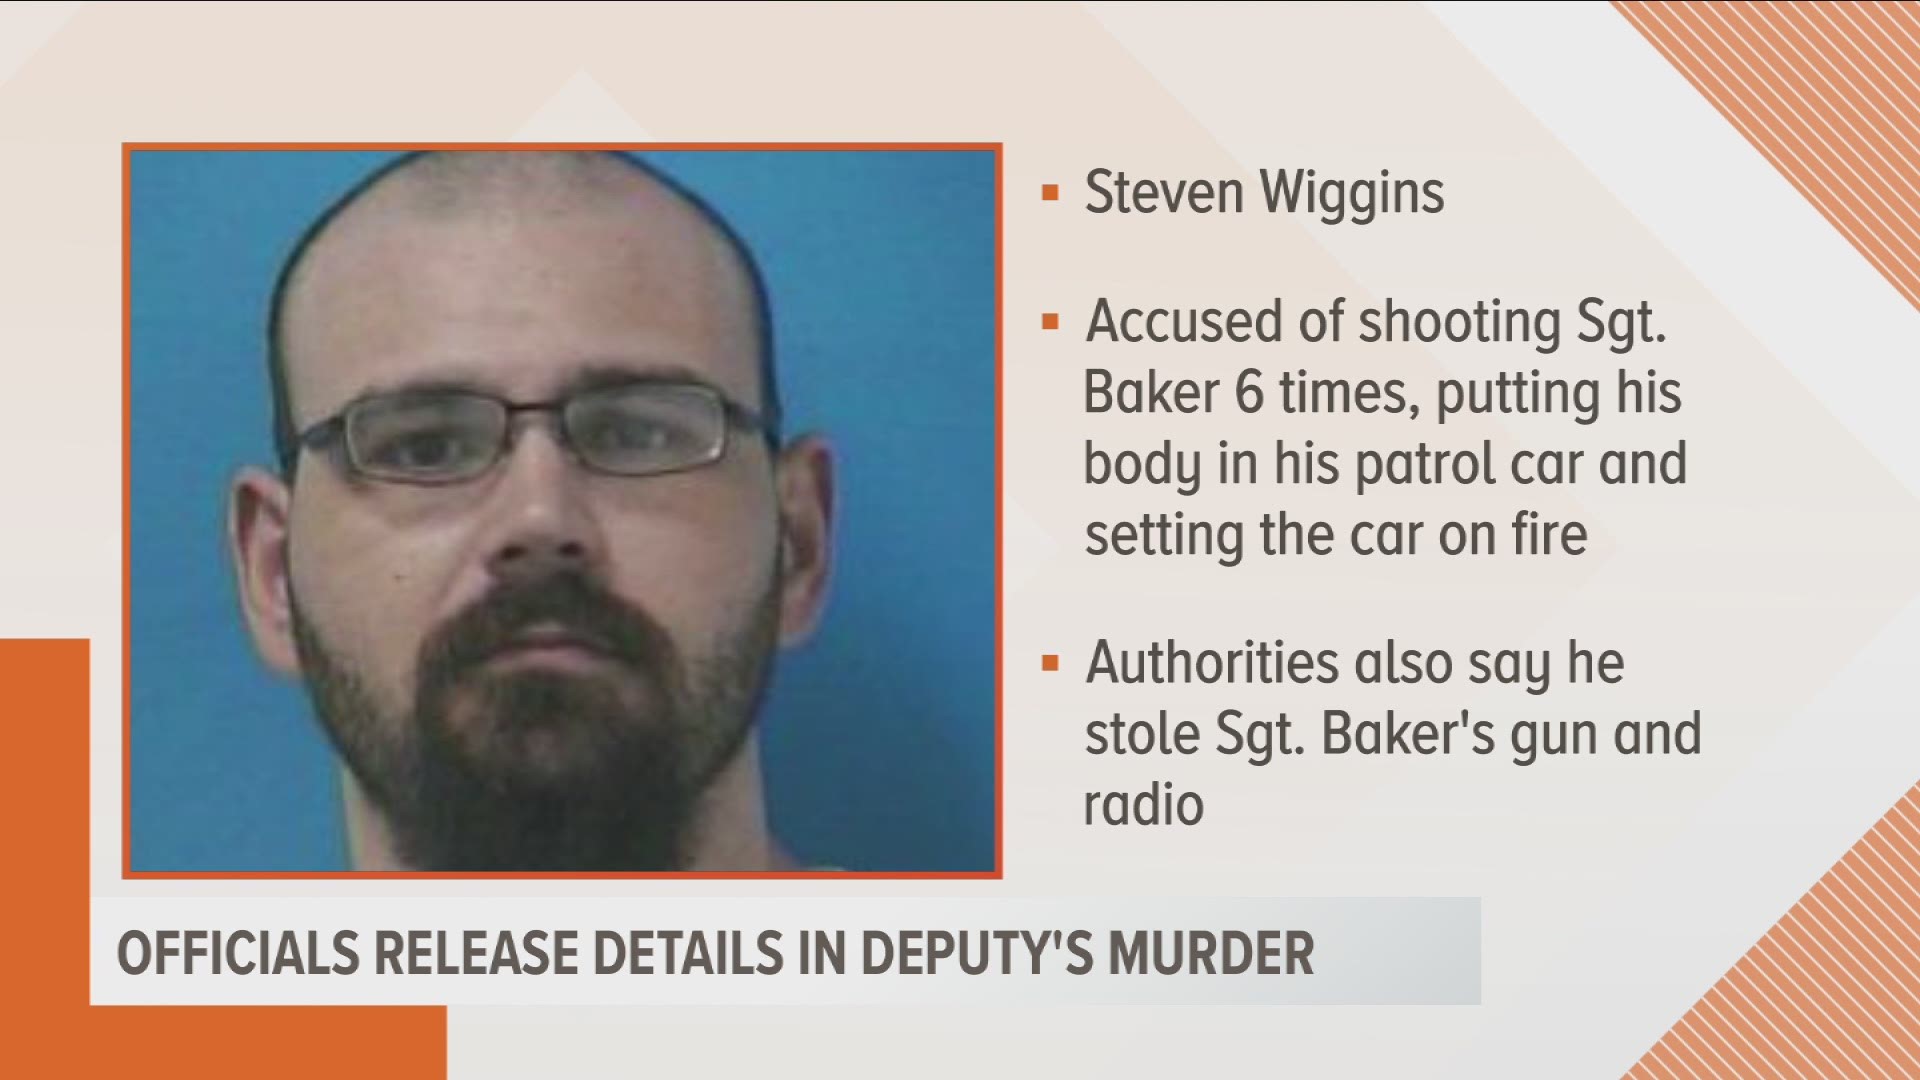 Steven Wiggins and Erika Castro-Miles are both charged with first-degree premeditated murder in the death of Dickson Co. deputy Sgt. Daniel Baker.